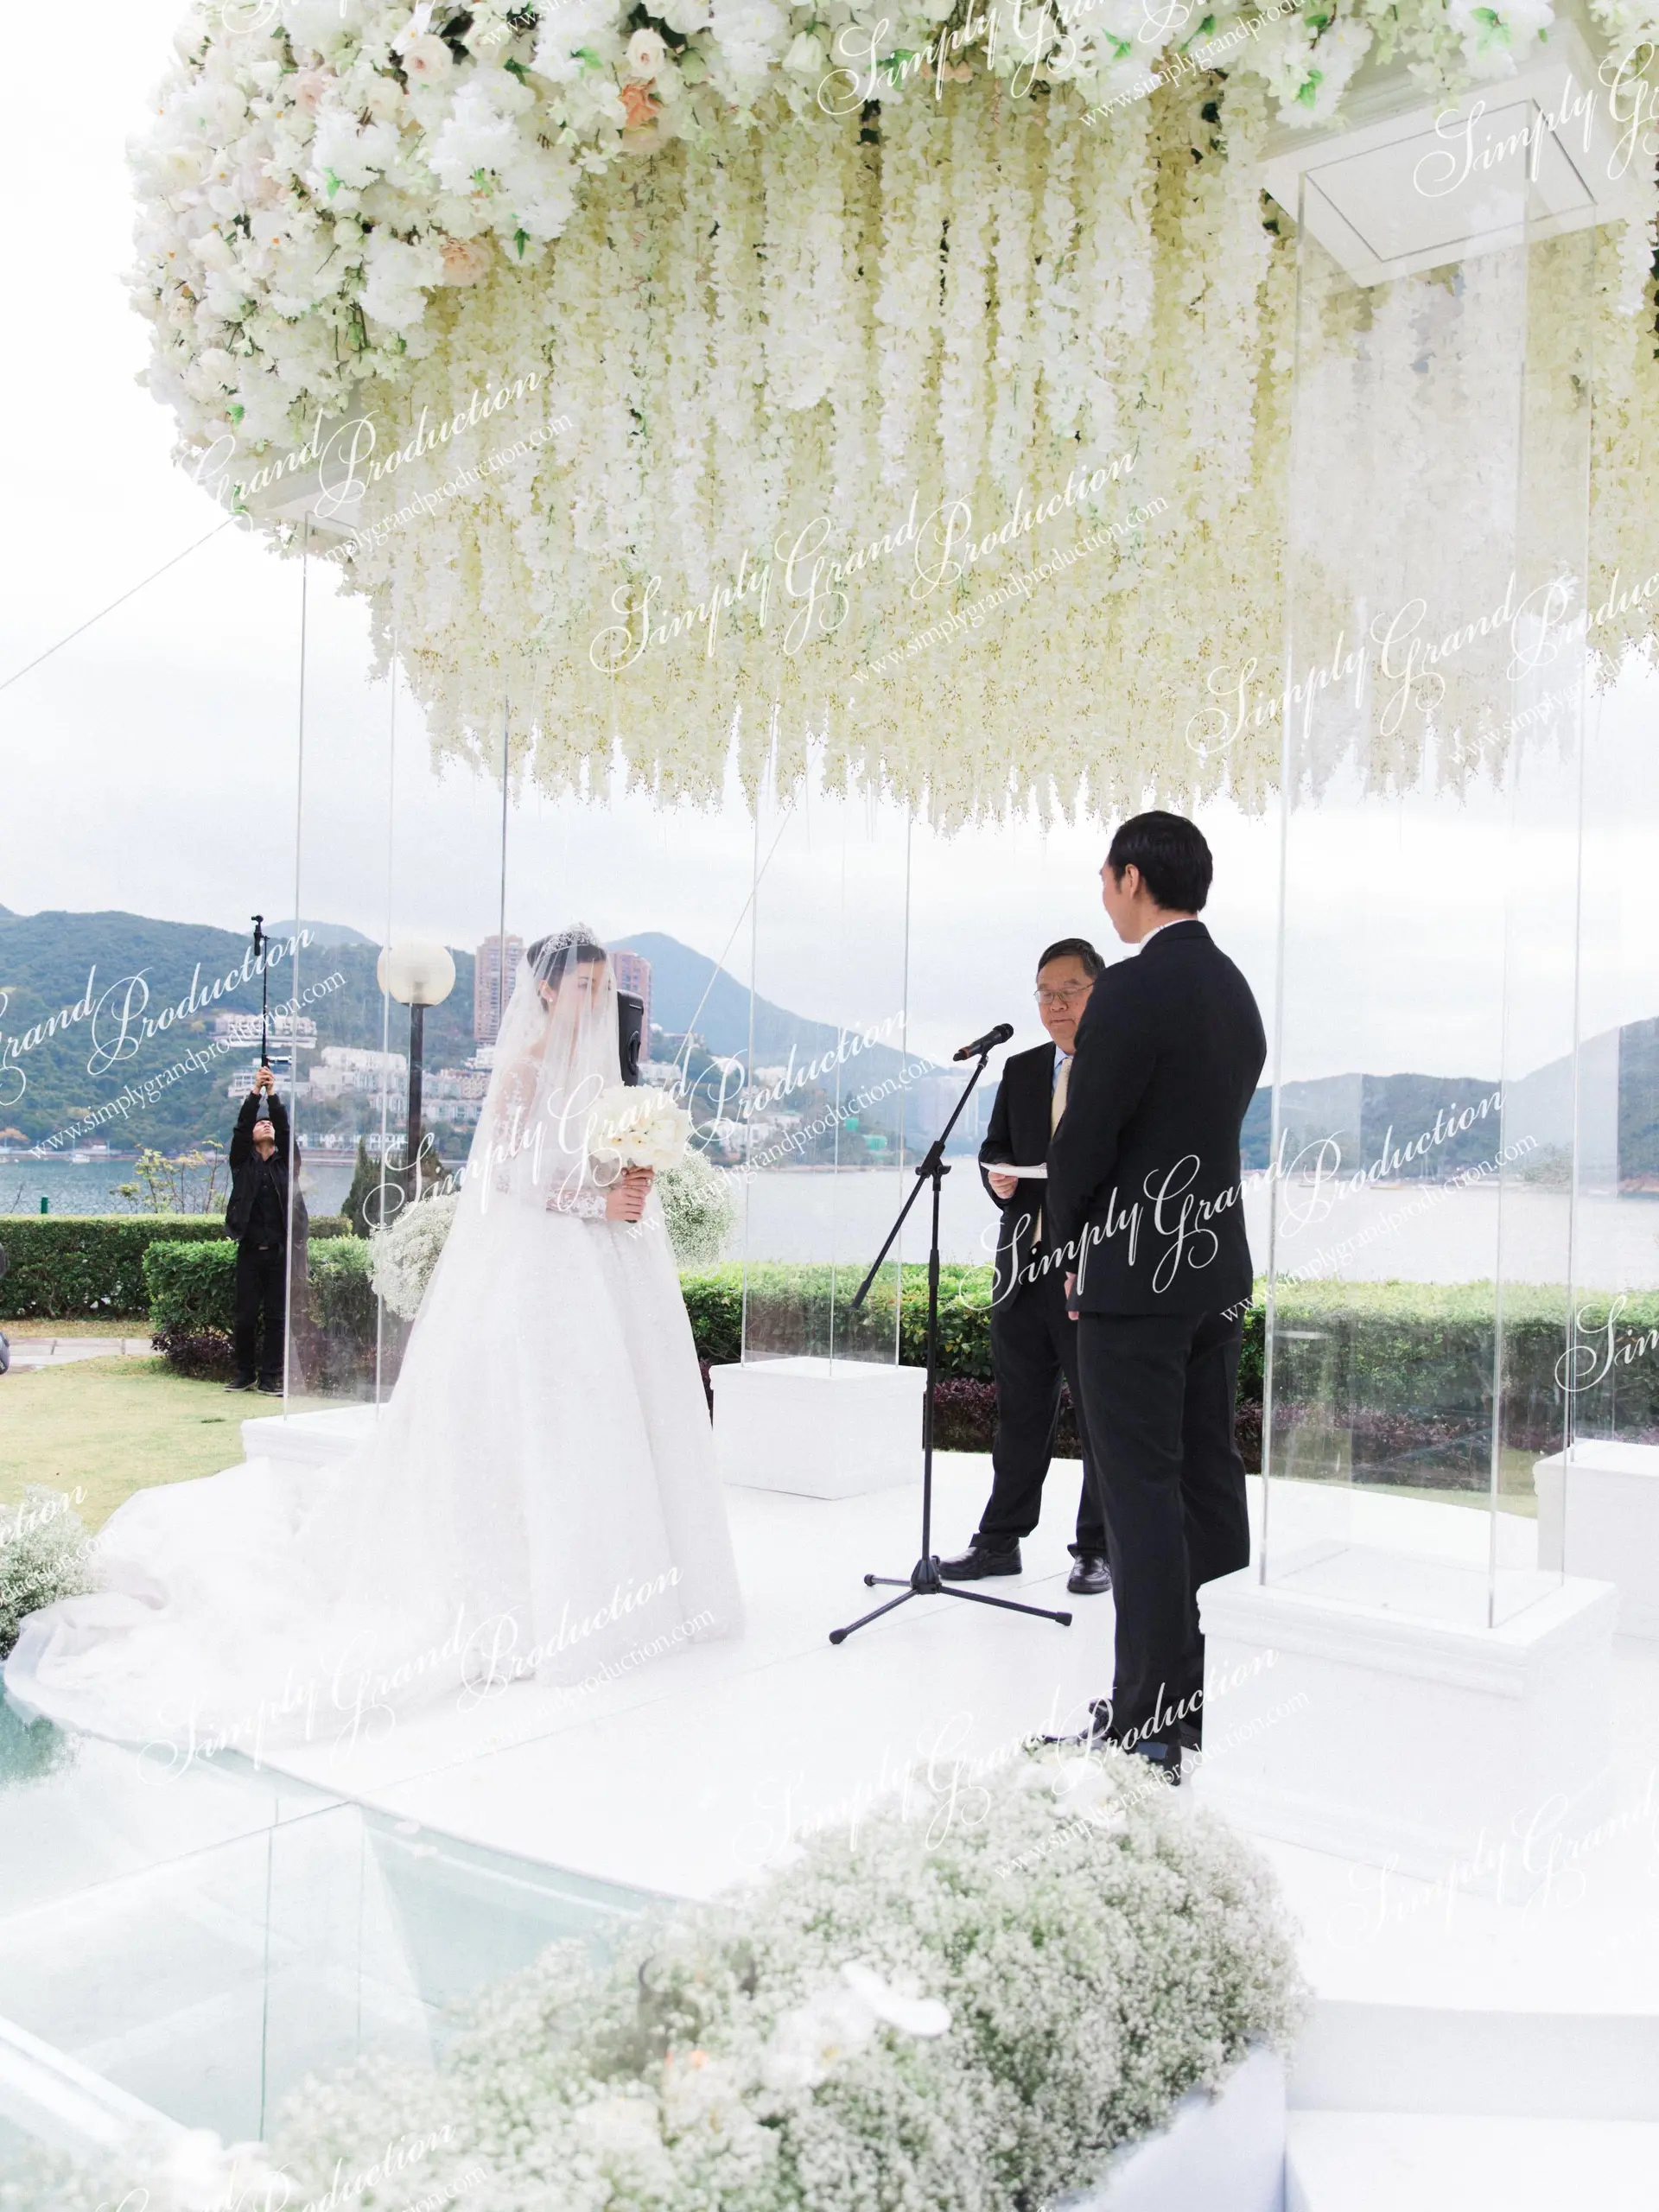 Simply_Grand_Production_Outdoor_wedding_decoration_ceremony_arch_vows_Country_Club_1_11.jpg